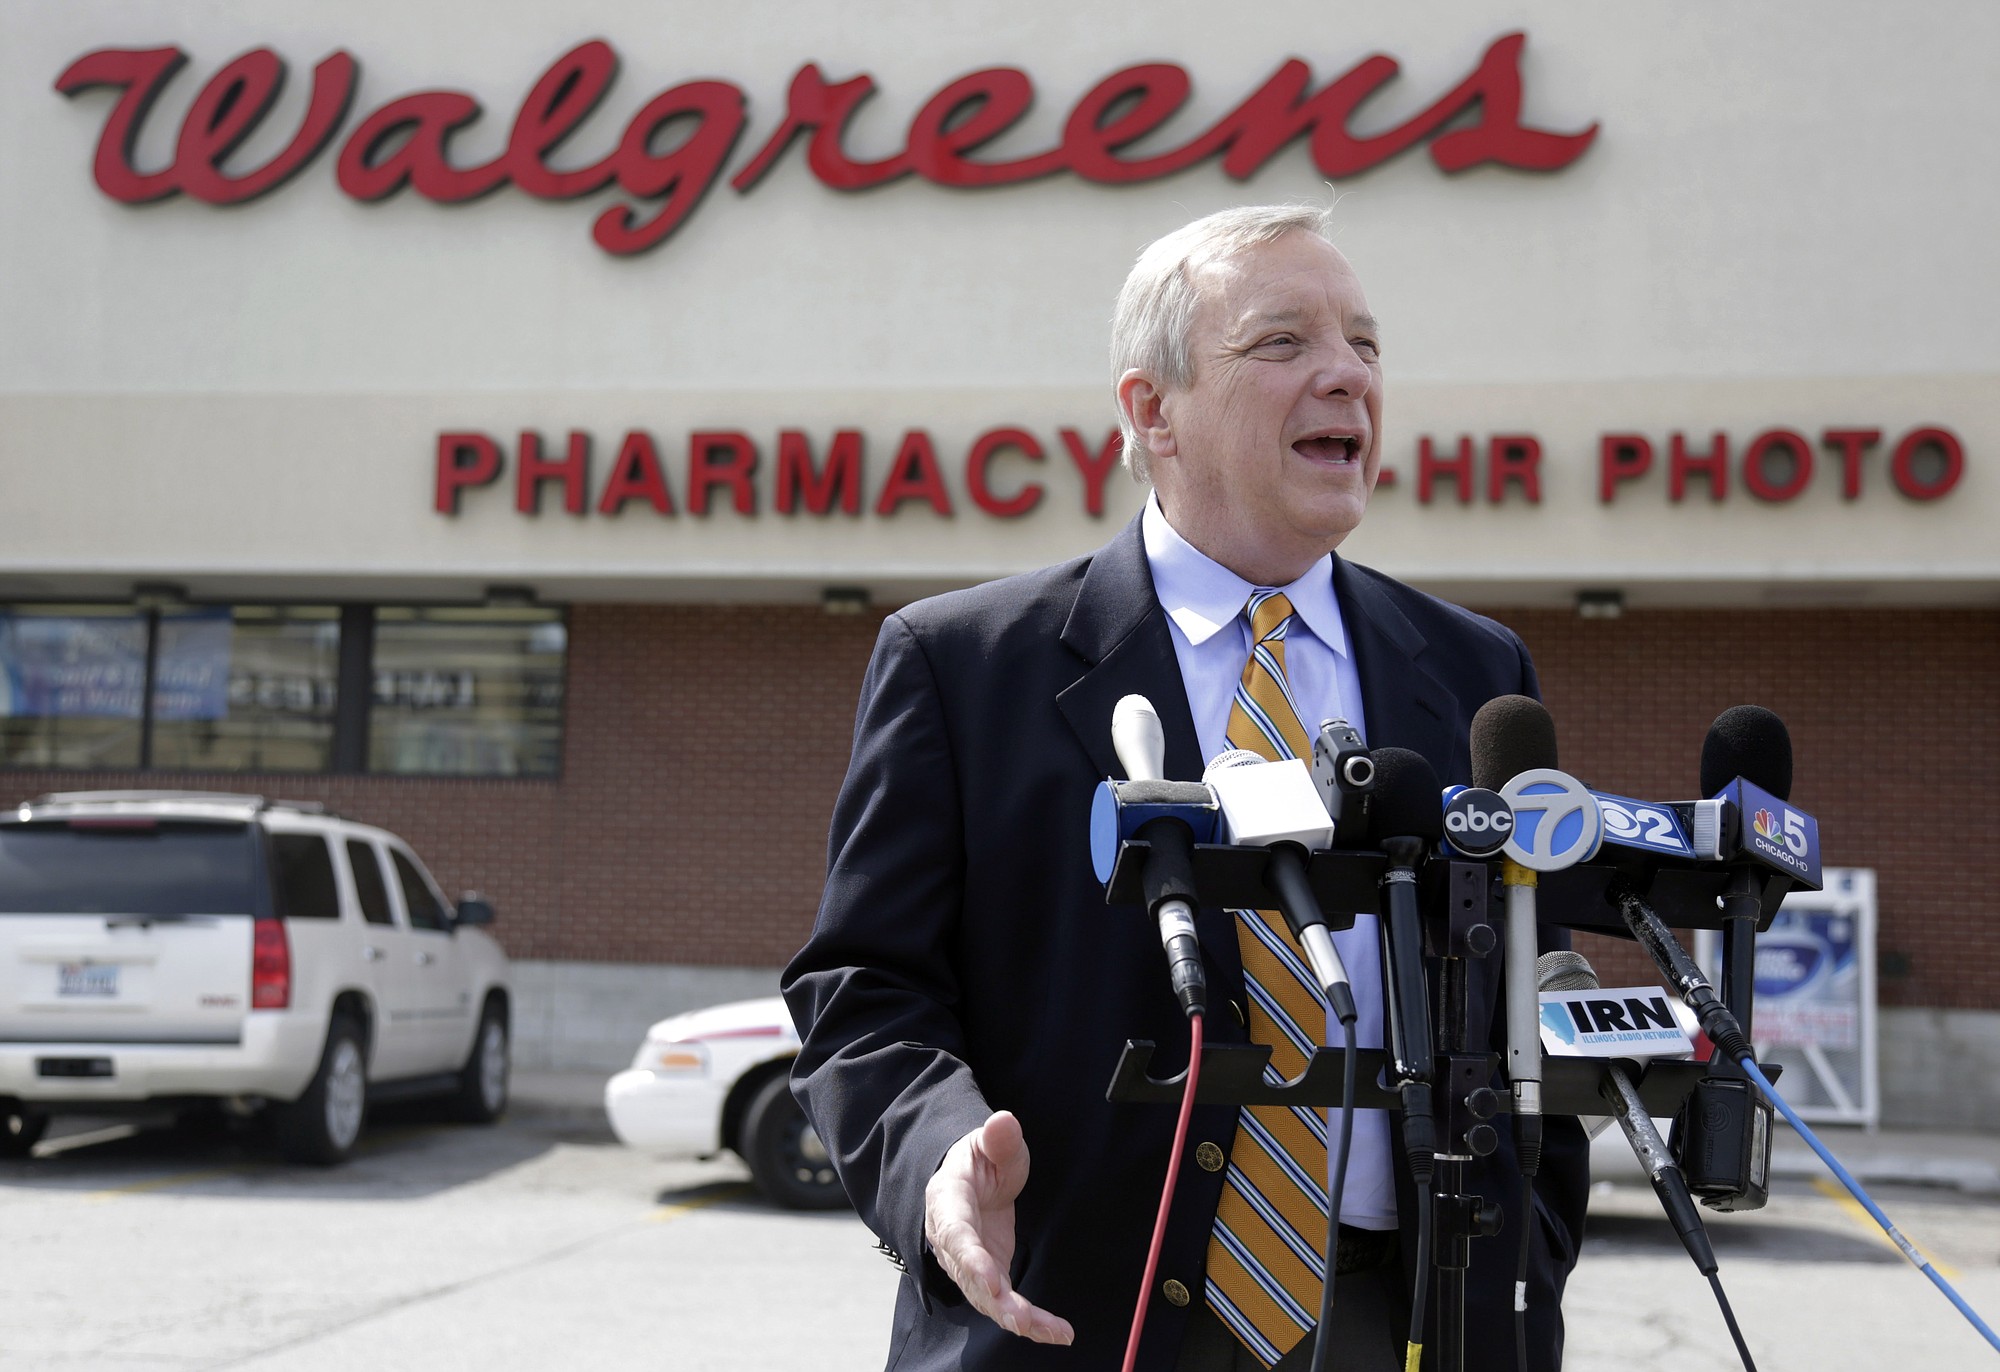 U.S. Sen. Dick Durbin, D-Ill., speaks during a news conference outside a Walgreen's drugstore Wednesday in Chicago. Durbin praised Walgreen Co., the nation's largest drugstore chain, for declining to pursue an overseas reorganization to trim its U.S.